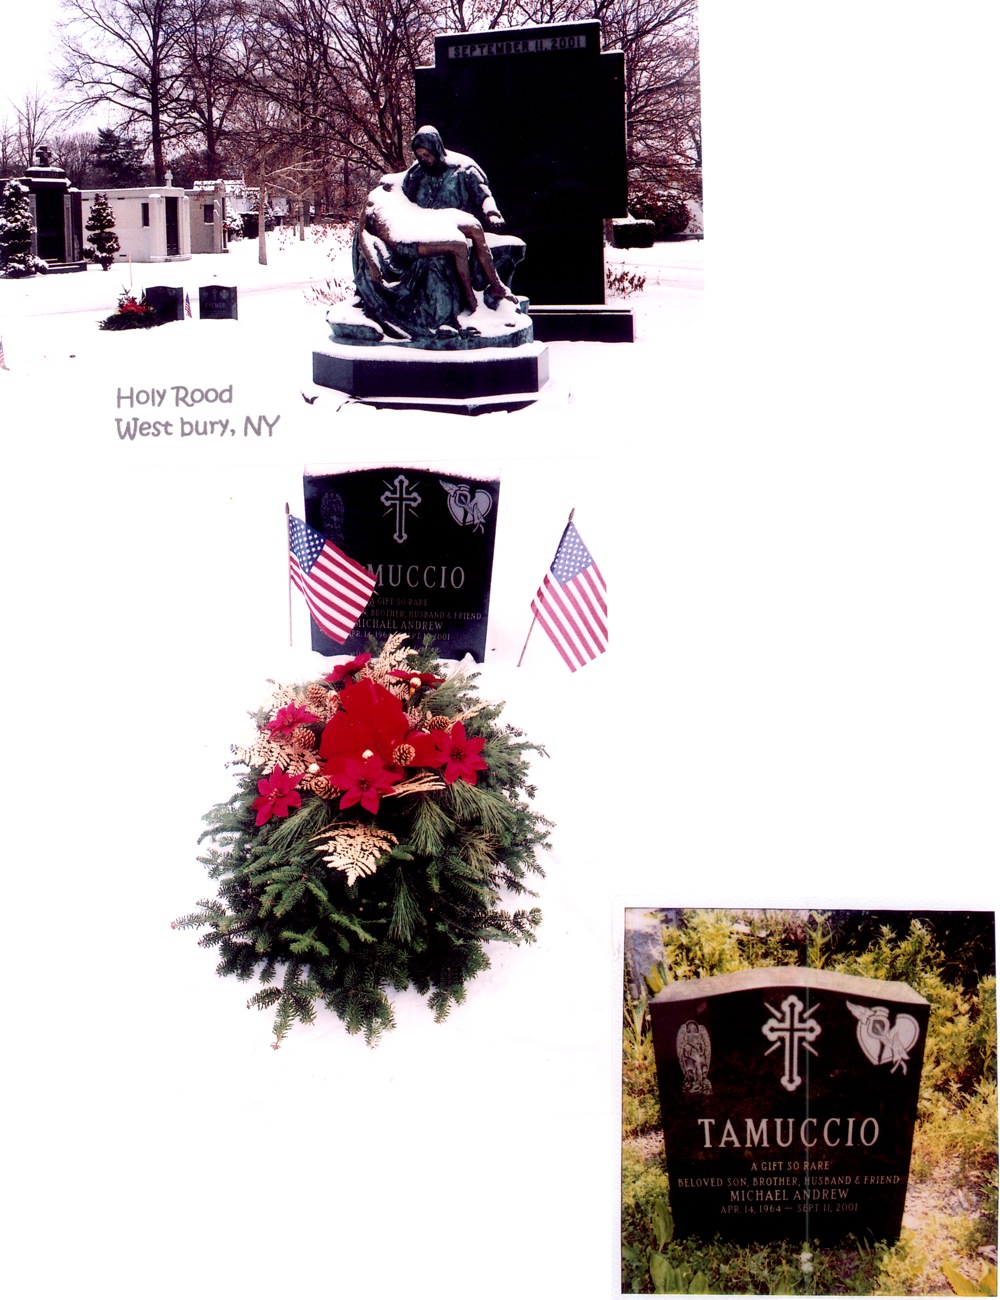 Michael's grave site in Holy Rood Cemetery in Westbury, Long Island, New York.